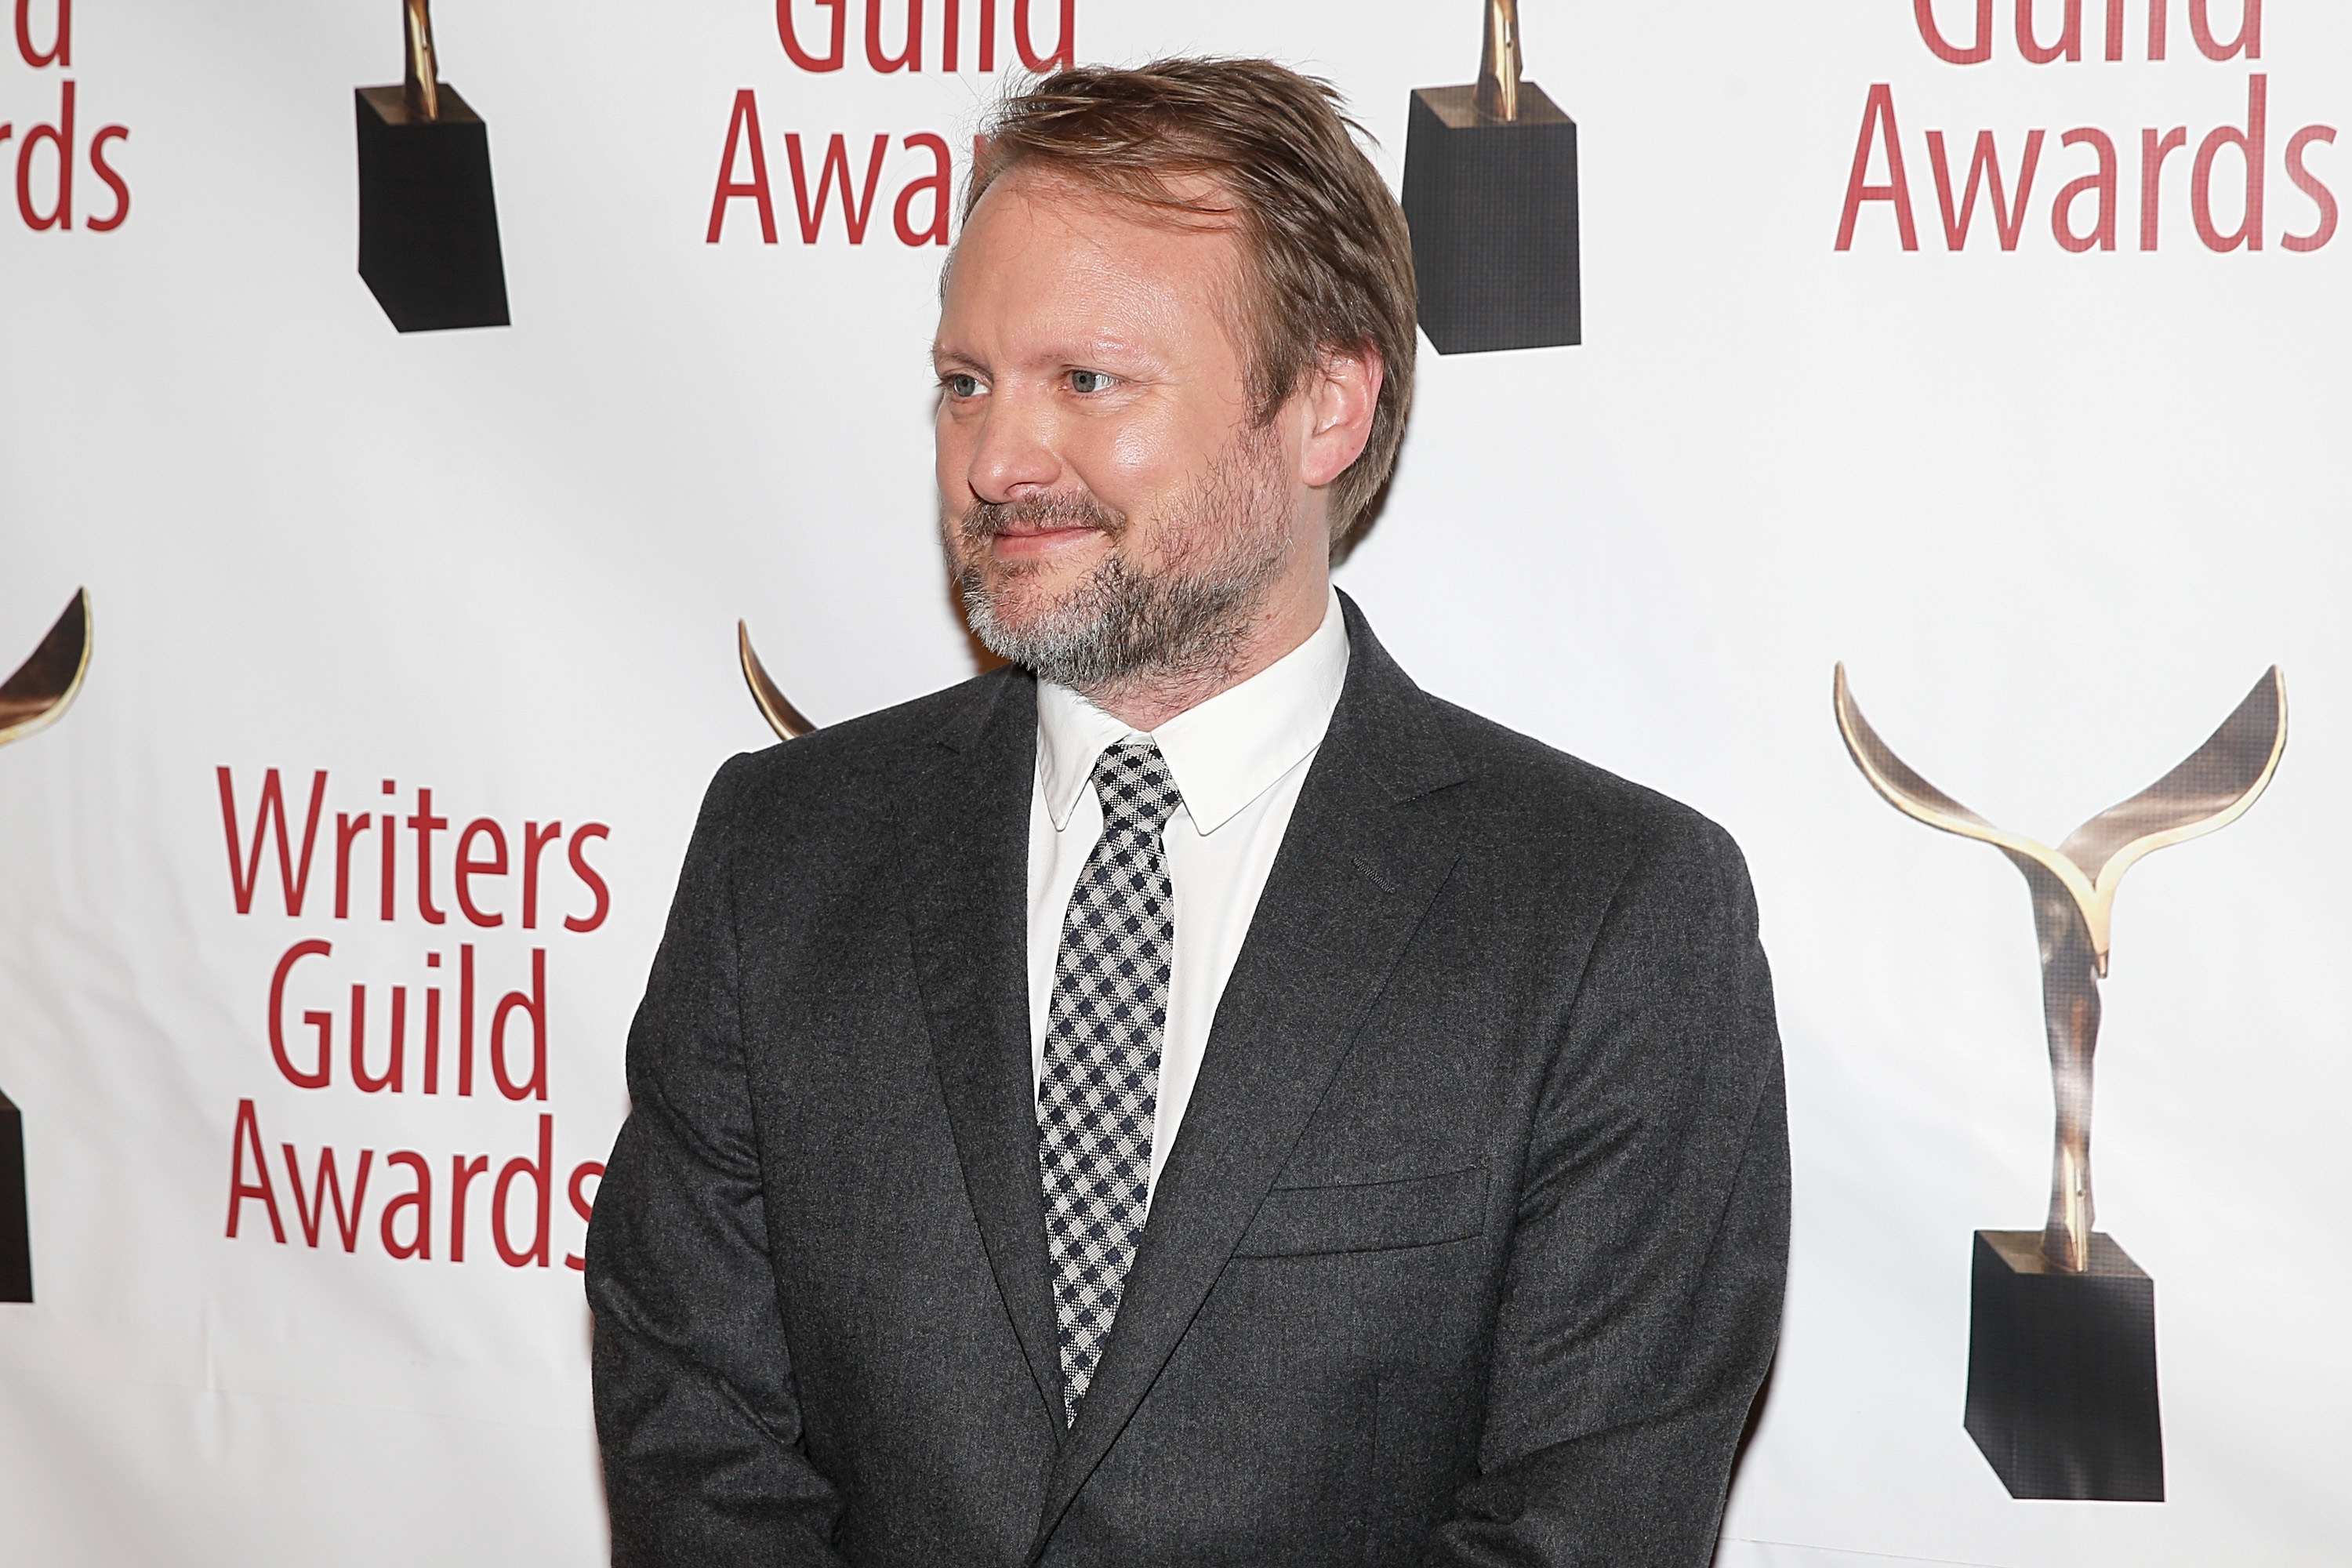 Photo of Rian Johnson at the 2020 Writers Guild Awards